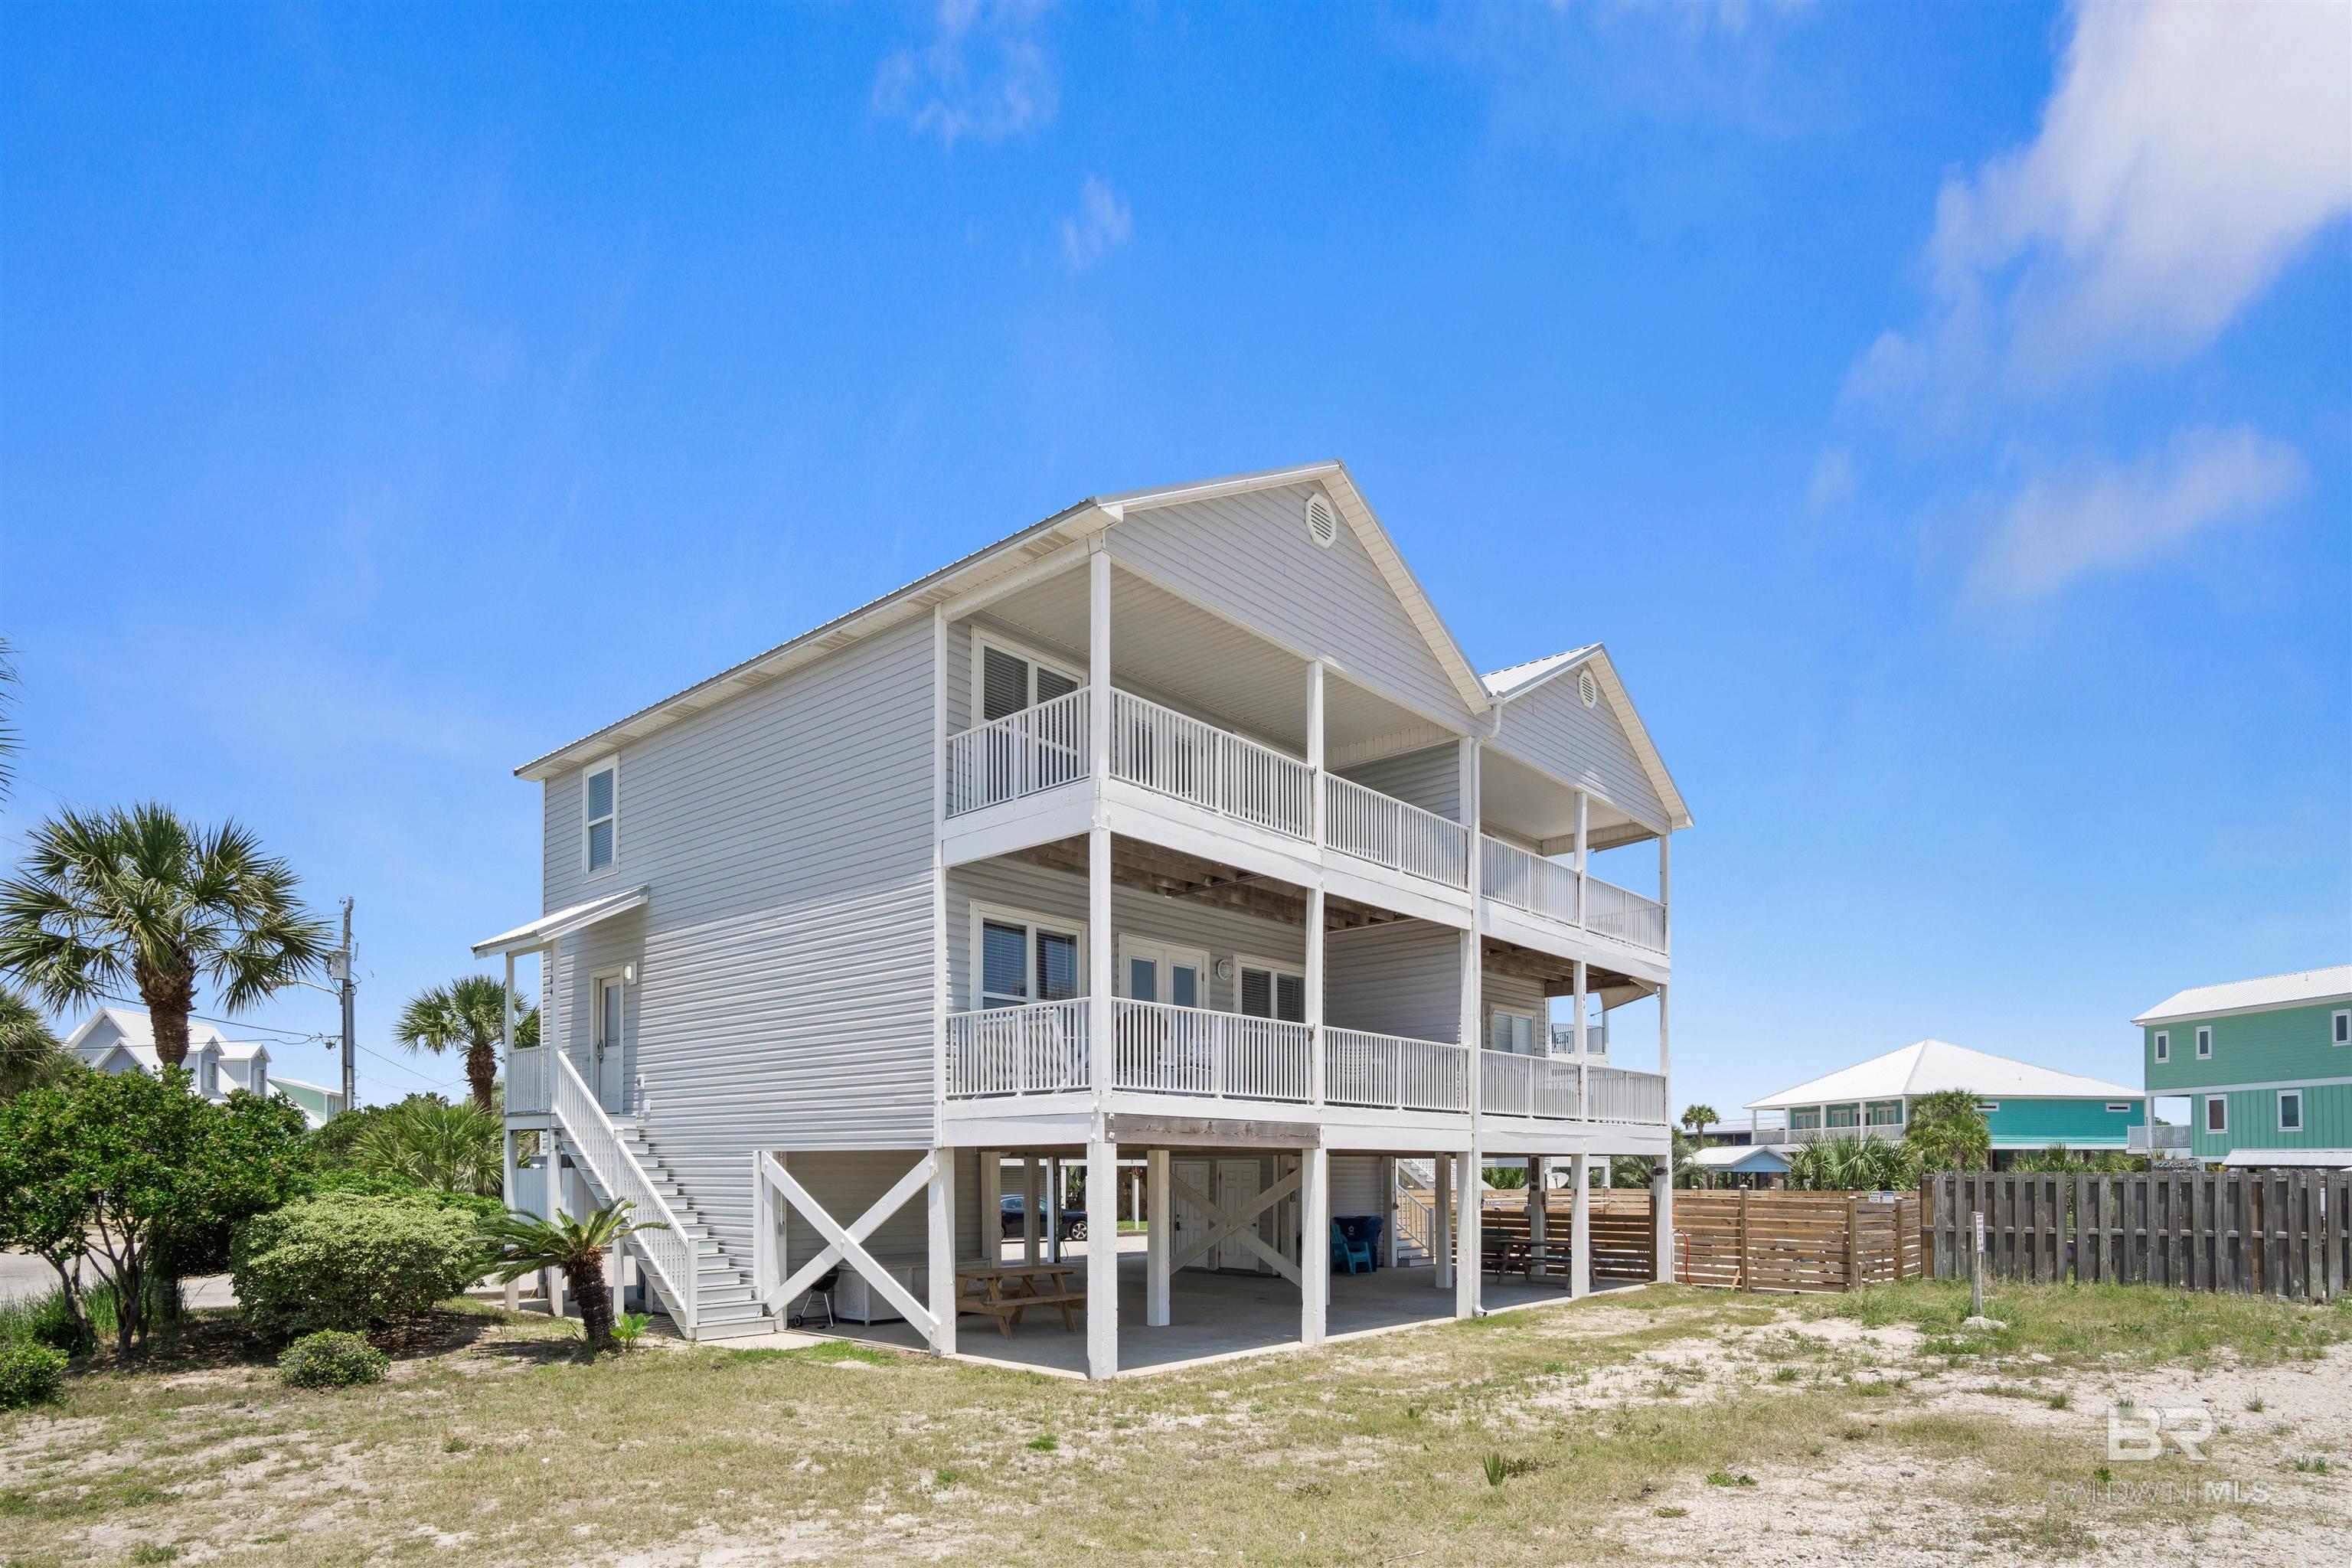 This rare complex on West Beach doesn’t come on the market often! Located on Little Lagoon, this low density condo includes private water access. Bring your kayak, jet skis, and fishing rods! This unit is perfect for those that enjoy the beach but also like to play in lake. It is one of three in the whole complex, which makes it very appealing if you don’t like crowds and want full access to all the amenities!  It has been beautifully renovated in the last 2 years. Some of the renovations include granite countertops in the kitchen, new kitchen appliances and LVP flooring in the main living areas. There is a private outdoor pool for you and your guests. The beach is directly across the street and you can enjoy beach views from both of your outdoor balconies! Pier 33 grocery store and West Beach Coffee House are right next door. There is also easy access to all restaurants and entertainment in the heart of Gulf Shores! Do not miss out on this fantastic passive income opportunity! Showings will be limited due to the pre-booked short term rentals, however there is a full video tour ready to impress and prepare you for all it has to offer!